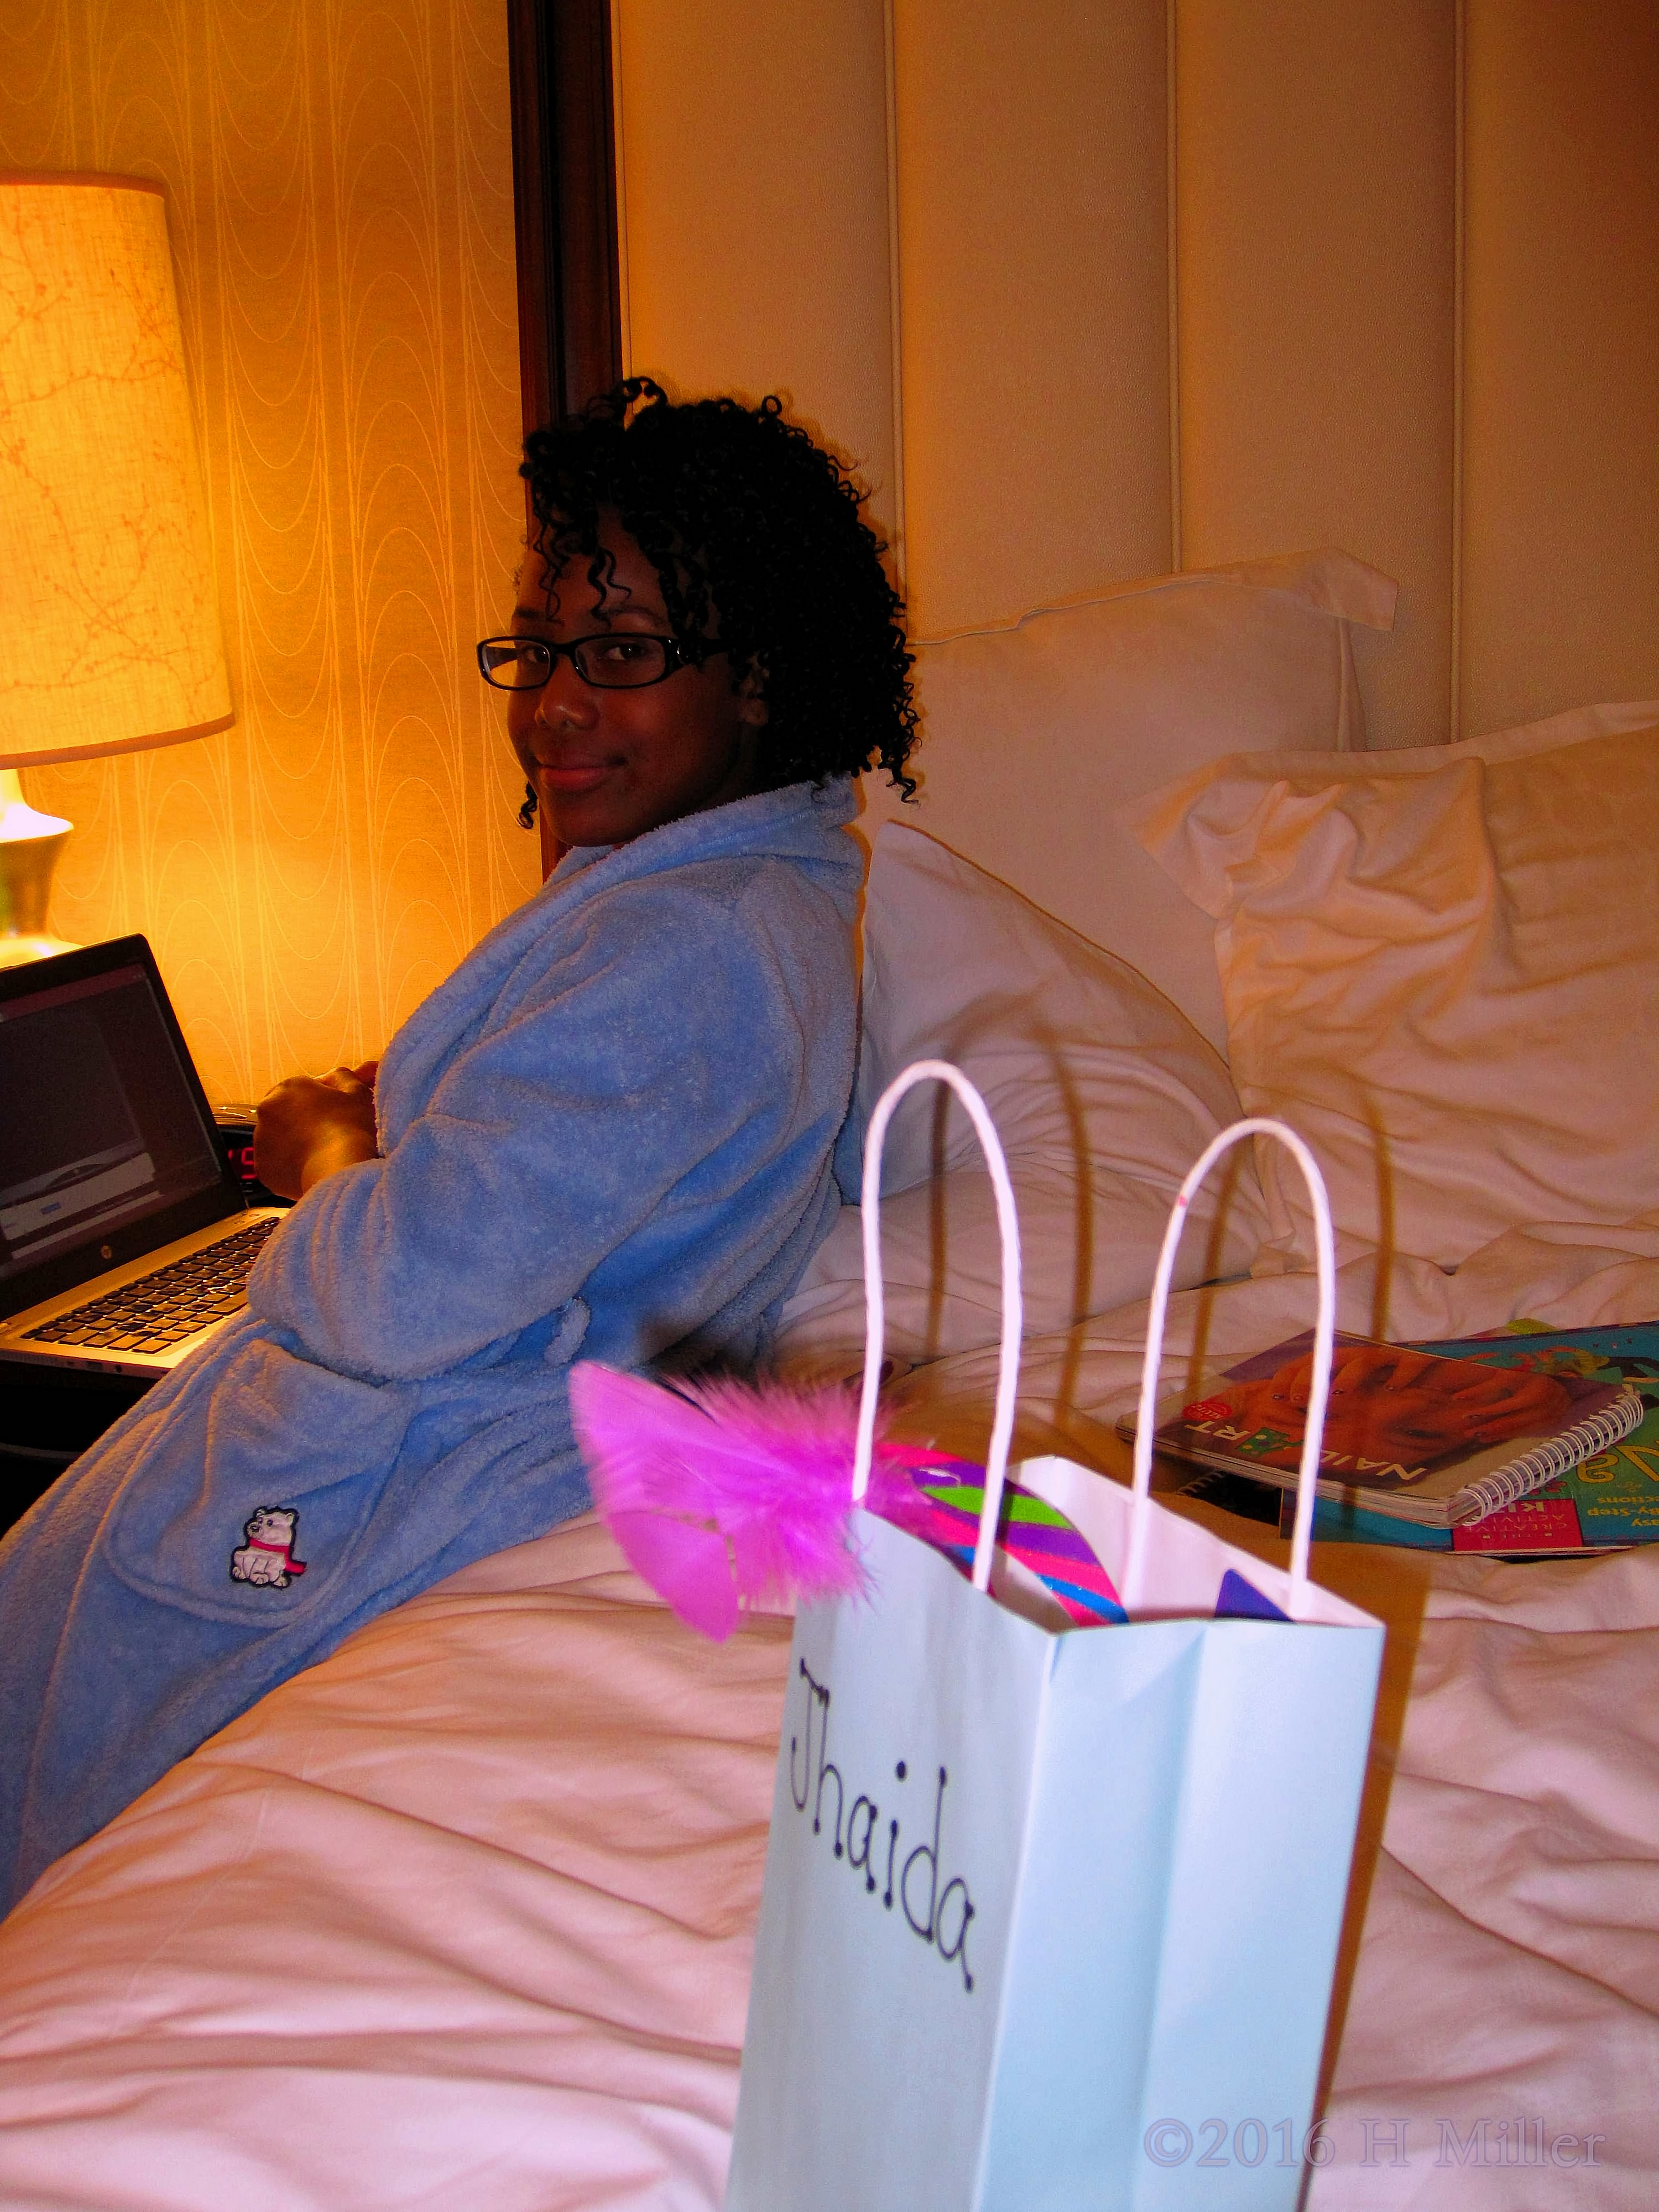 Blue Robed Spa Girl With Her Gift Bag